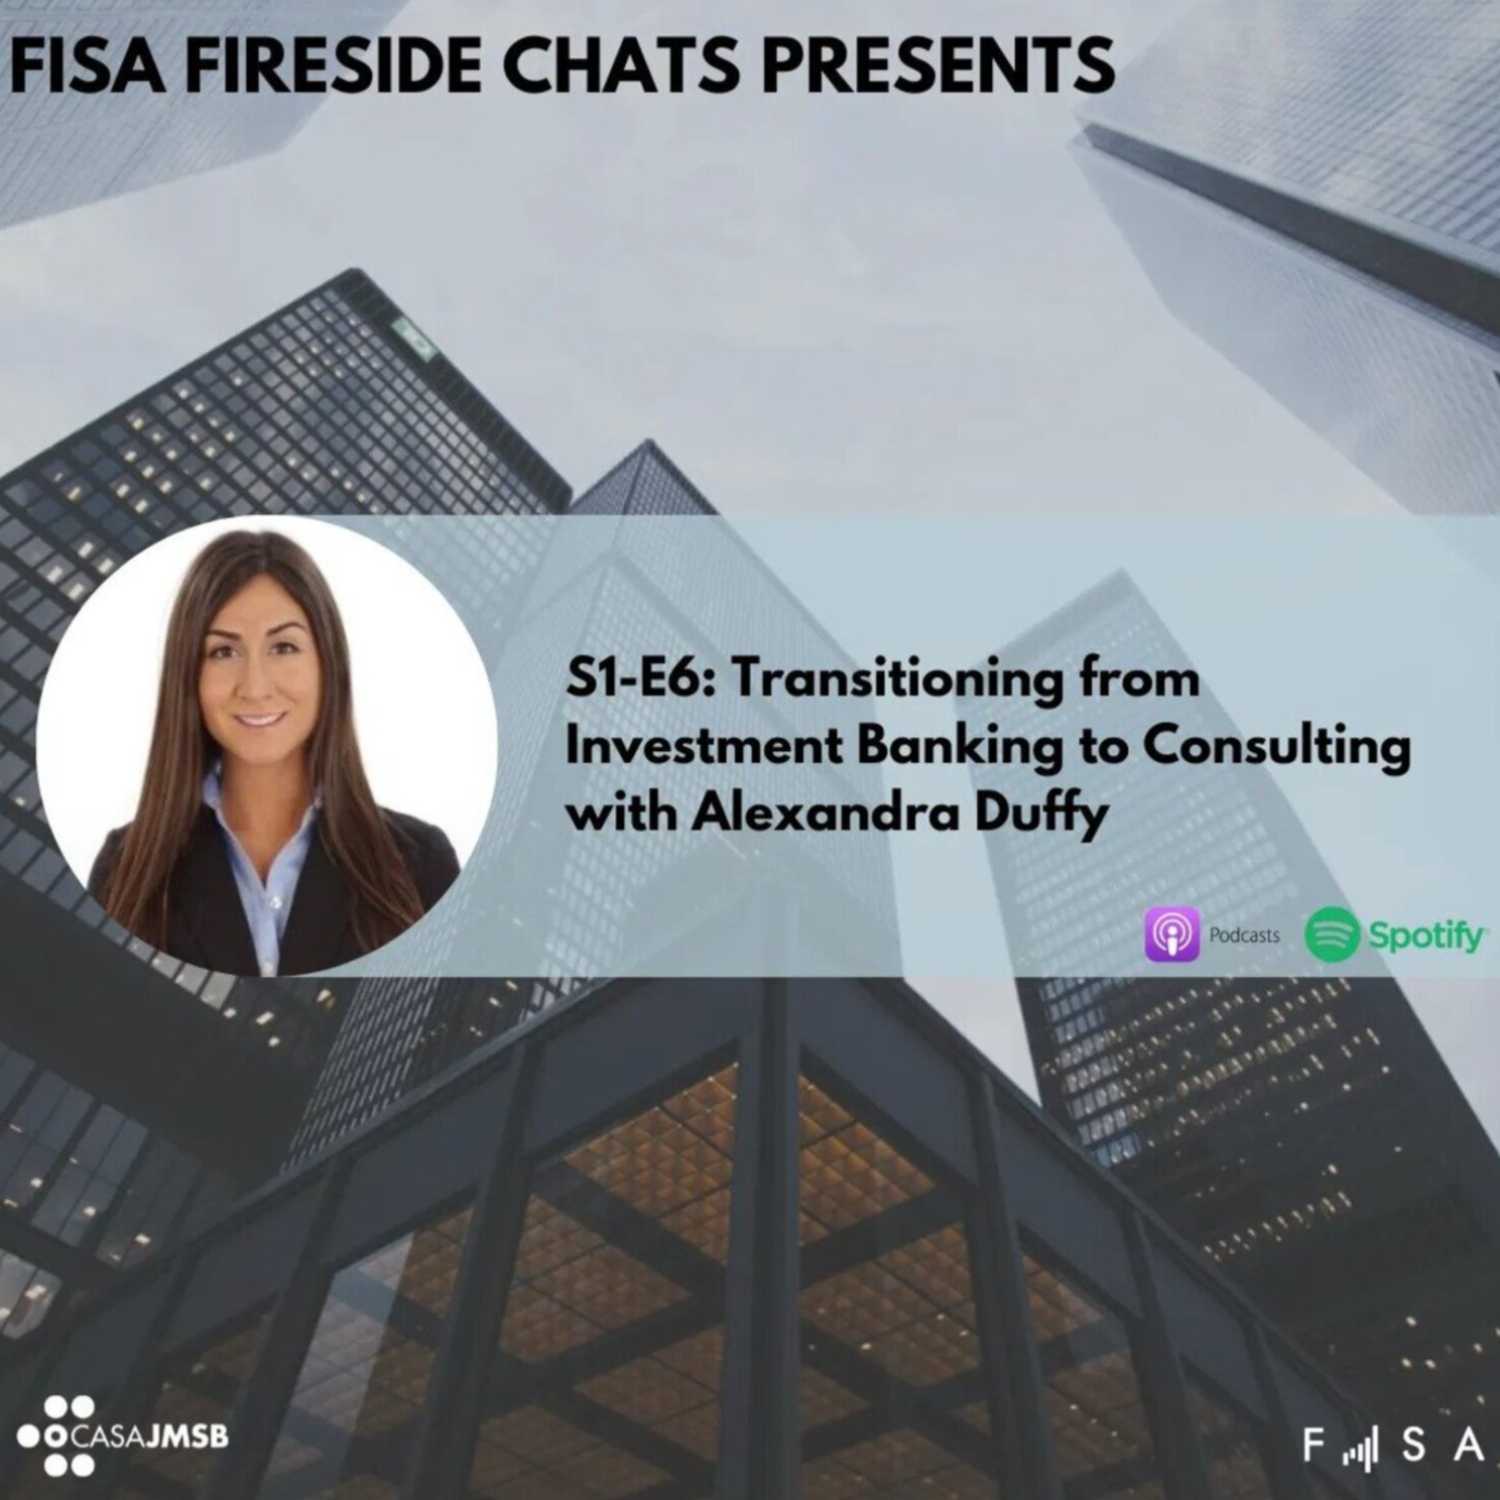 Transitioning from Investment Banking to Consulting with Alexandra Duffy